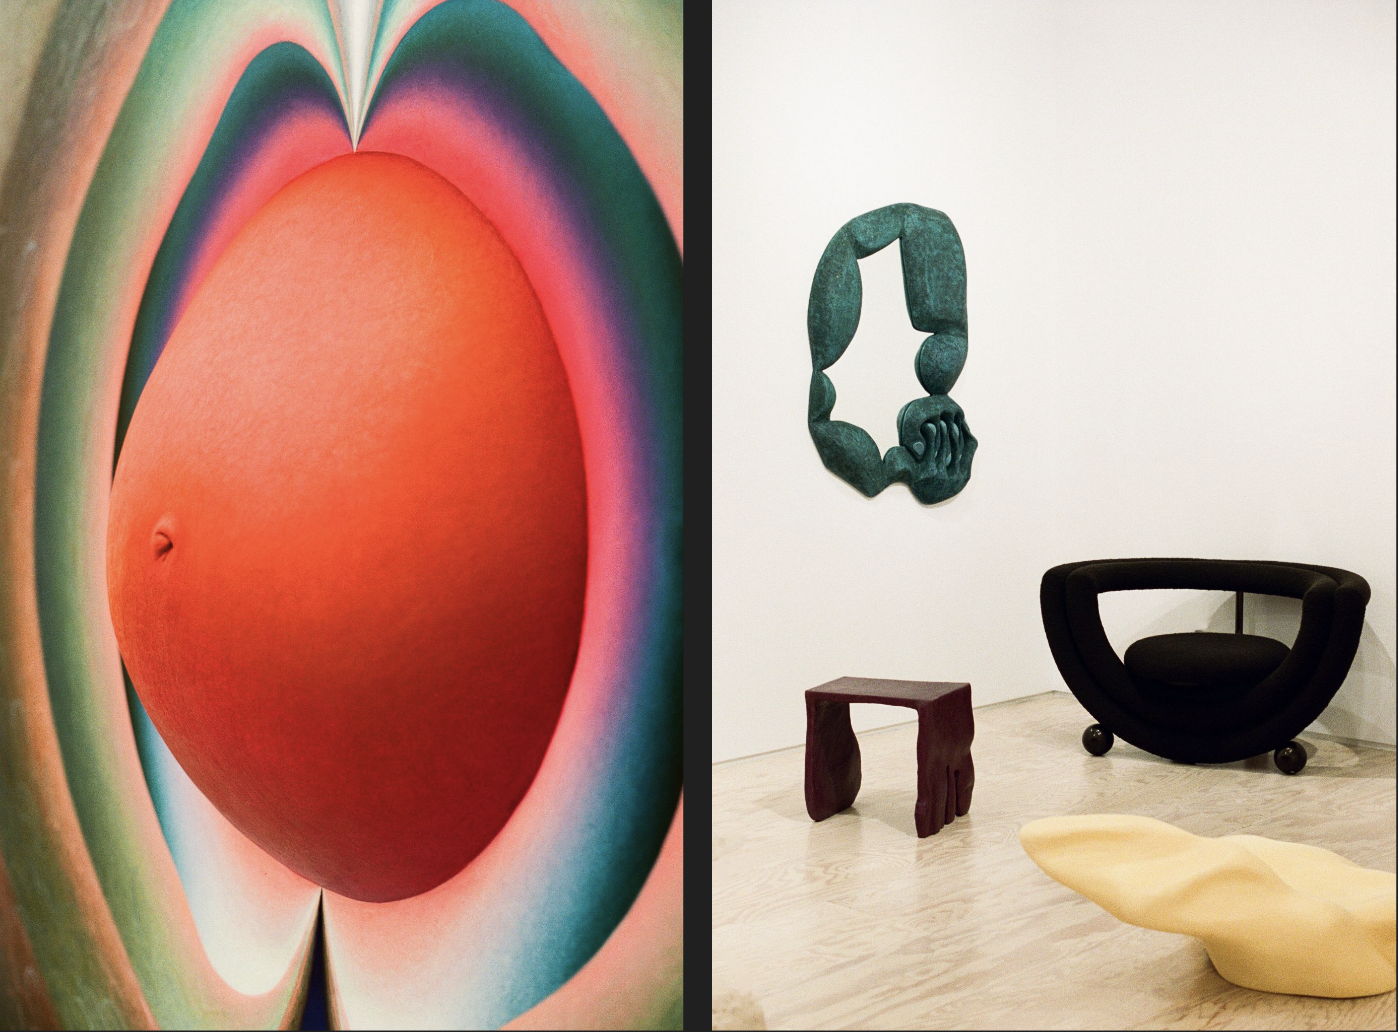 Now on view through March 2 at Jessica Silverman Gallery: Loie Hollowell’s solo exhibition *In Transition* and *Enthroned*, a group show featuring work by women designers co-curated with Marc Benda of Friedman Benda.